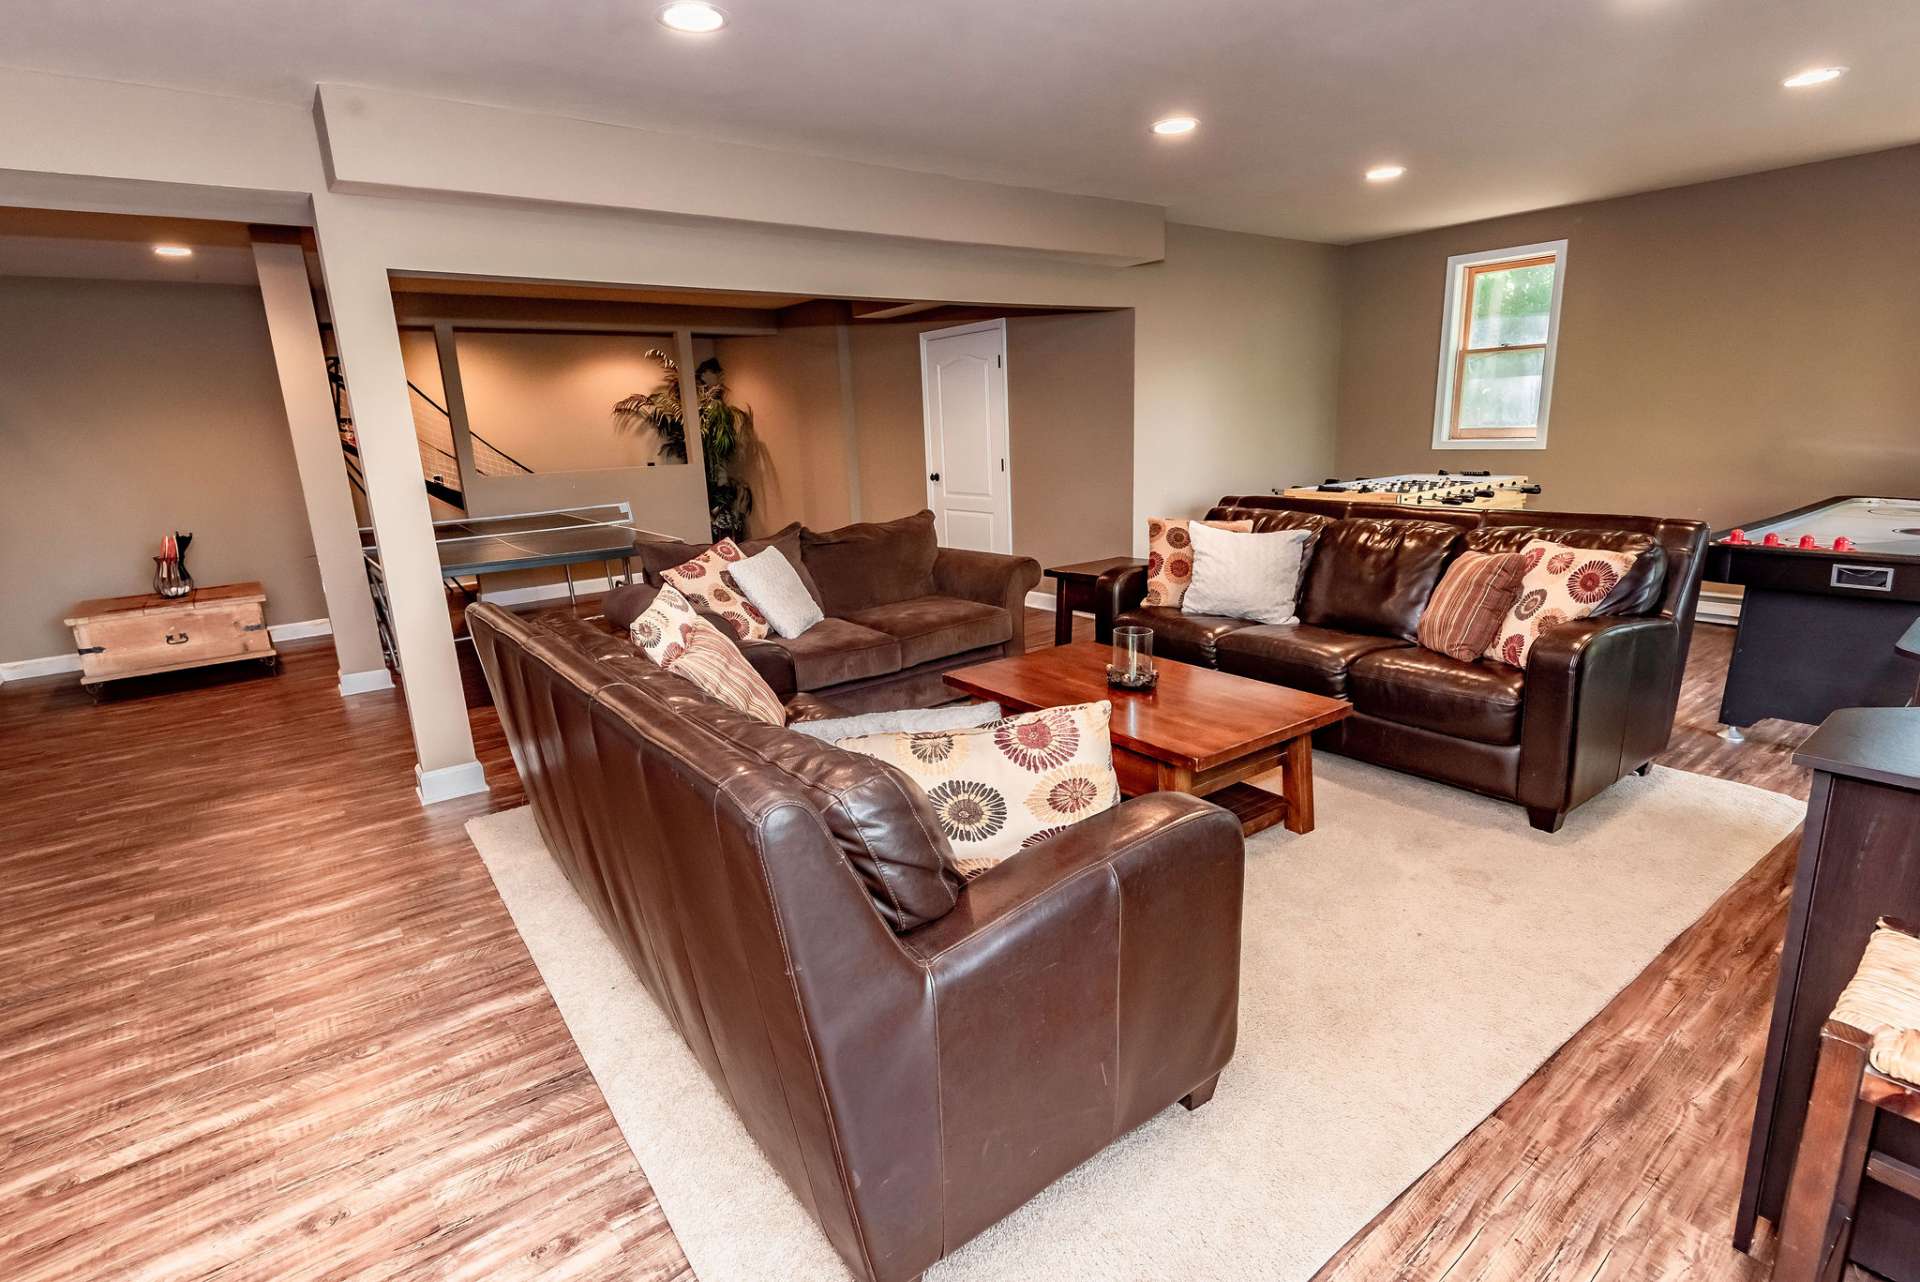 A full finished walk-out lower level features a large living area and game room.